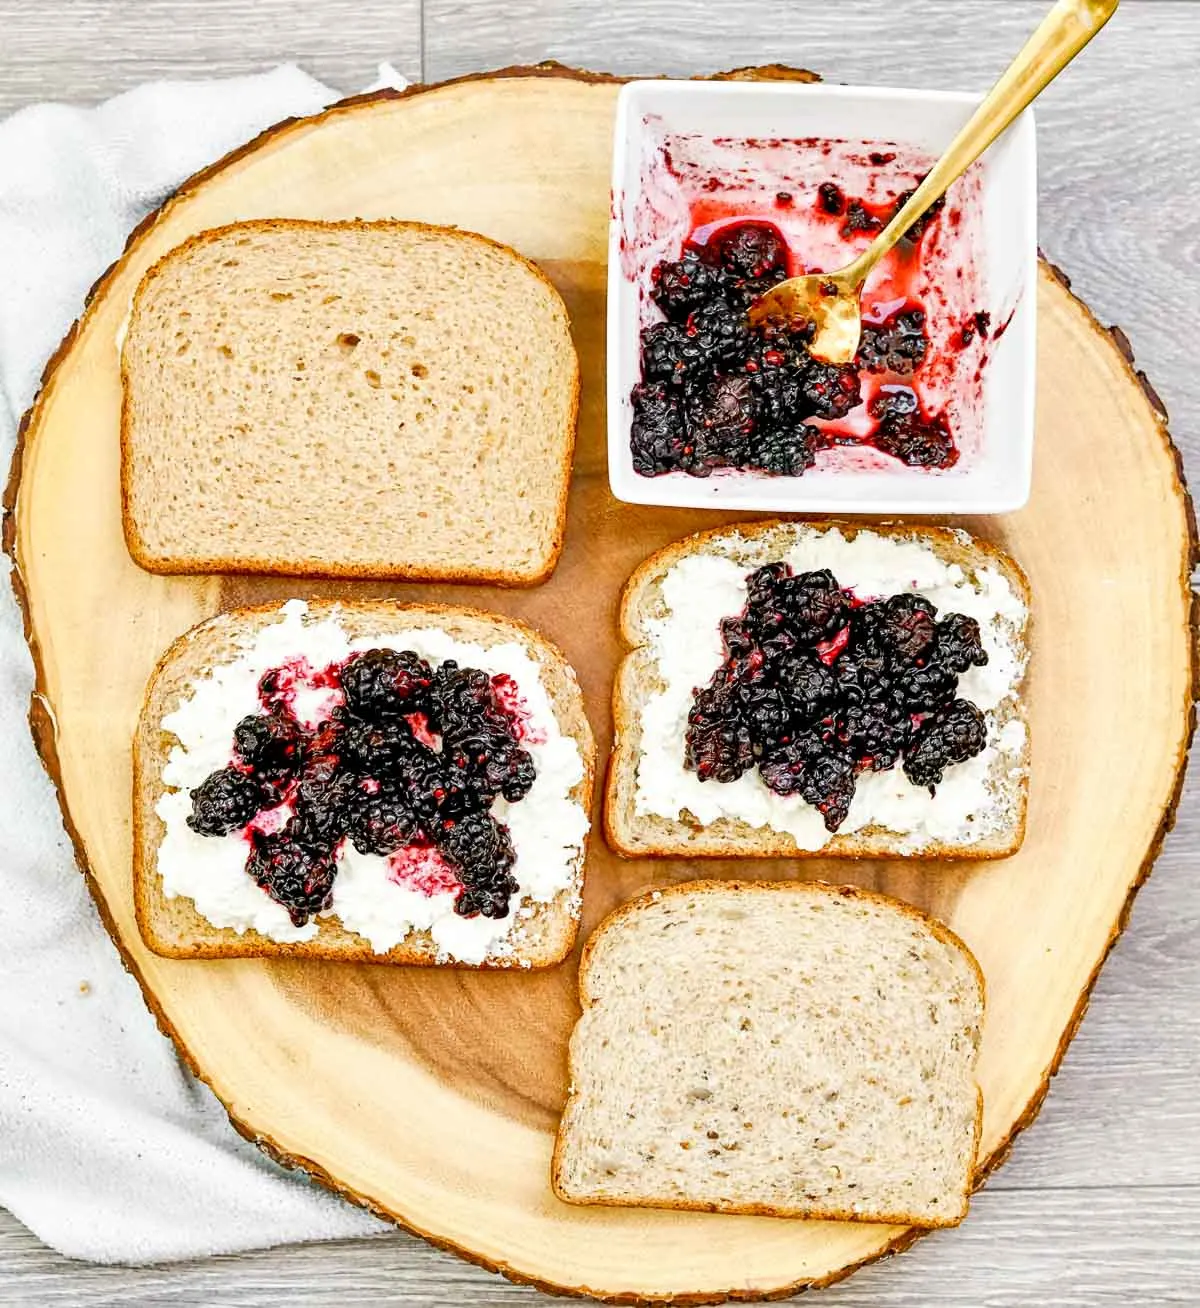 Spreading mashed blackberries over goat cheese on bread.